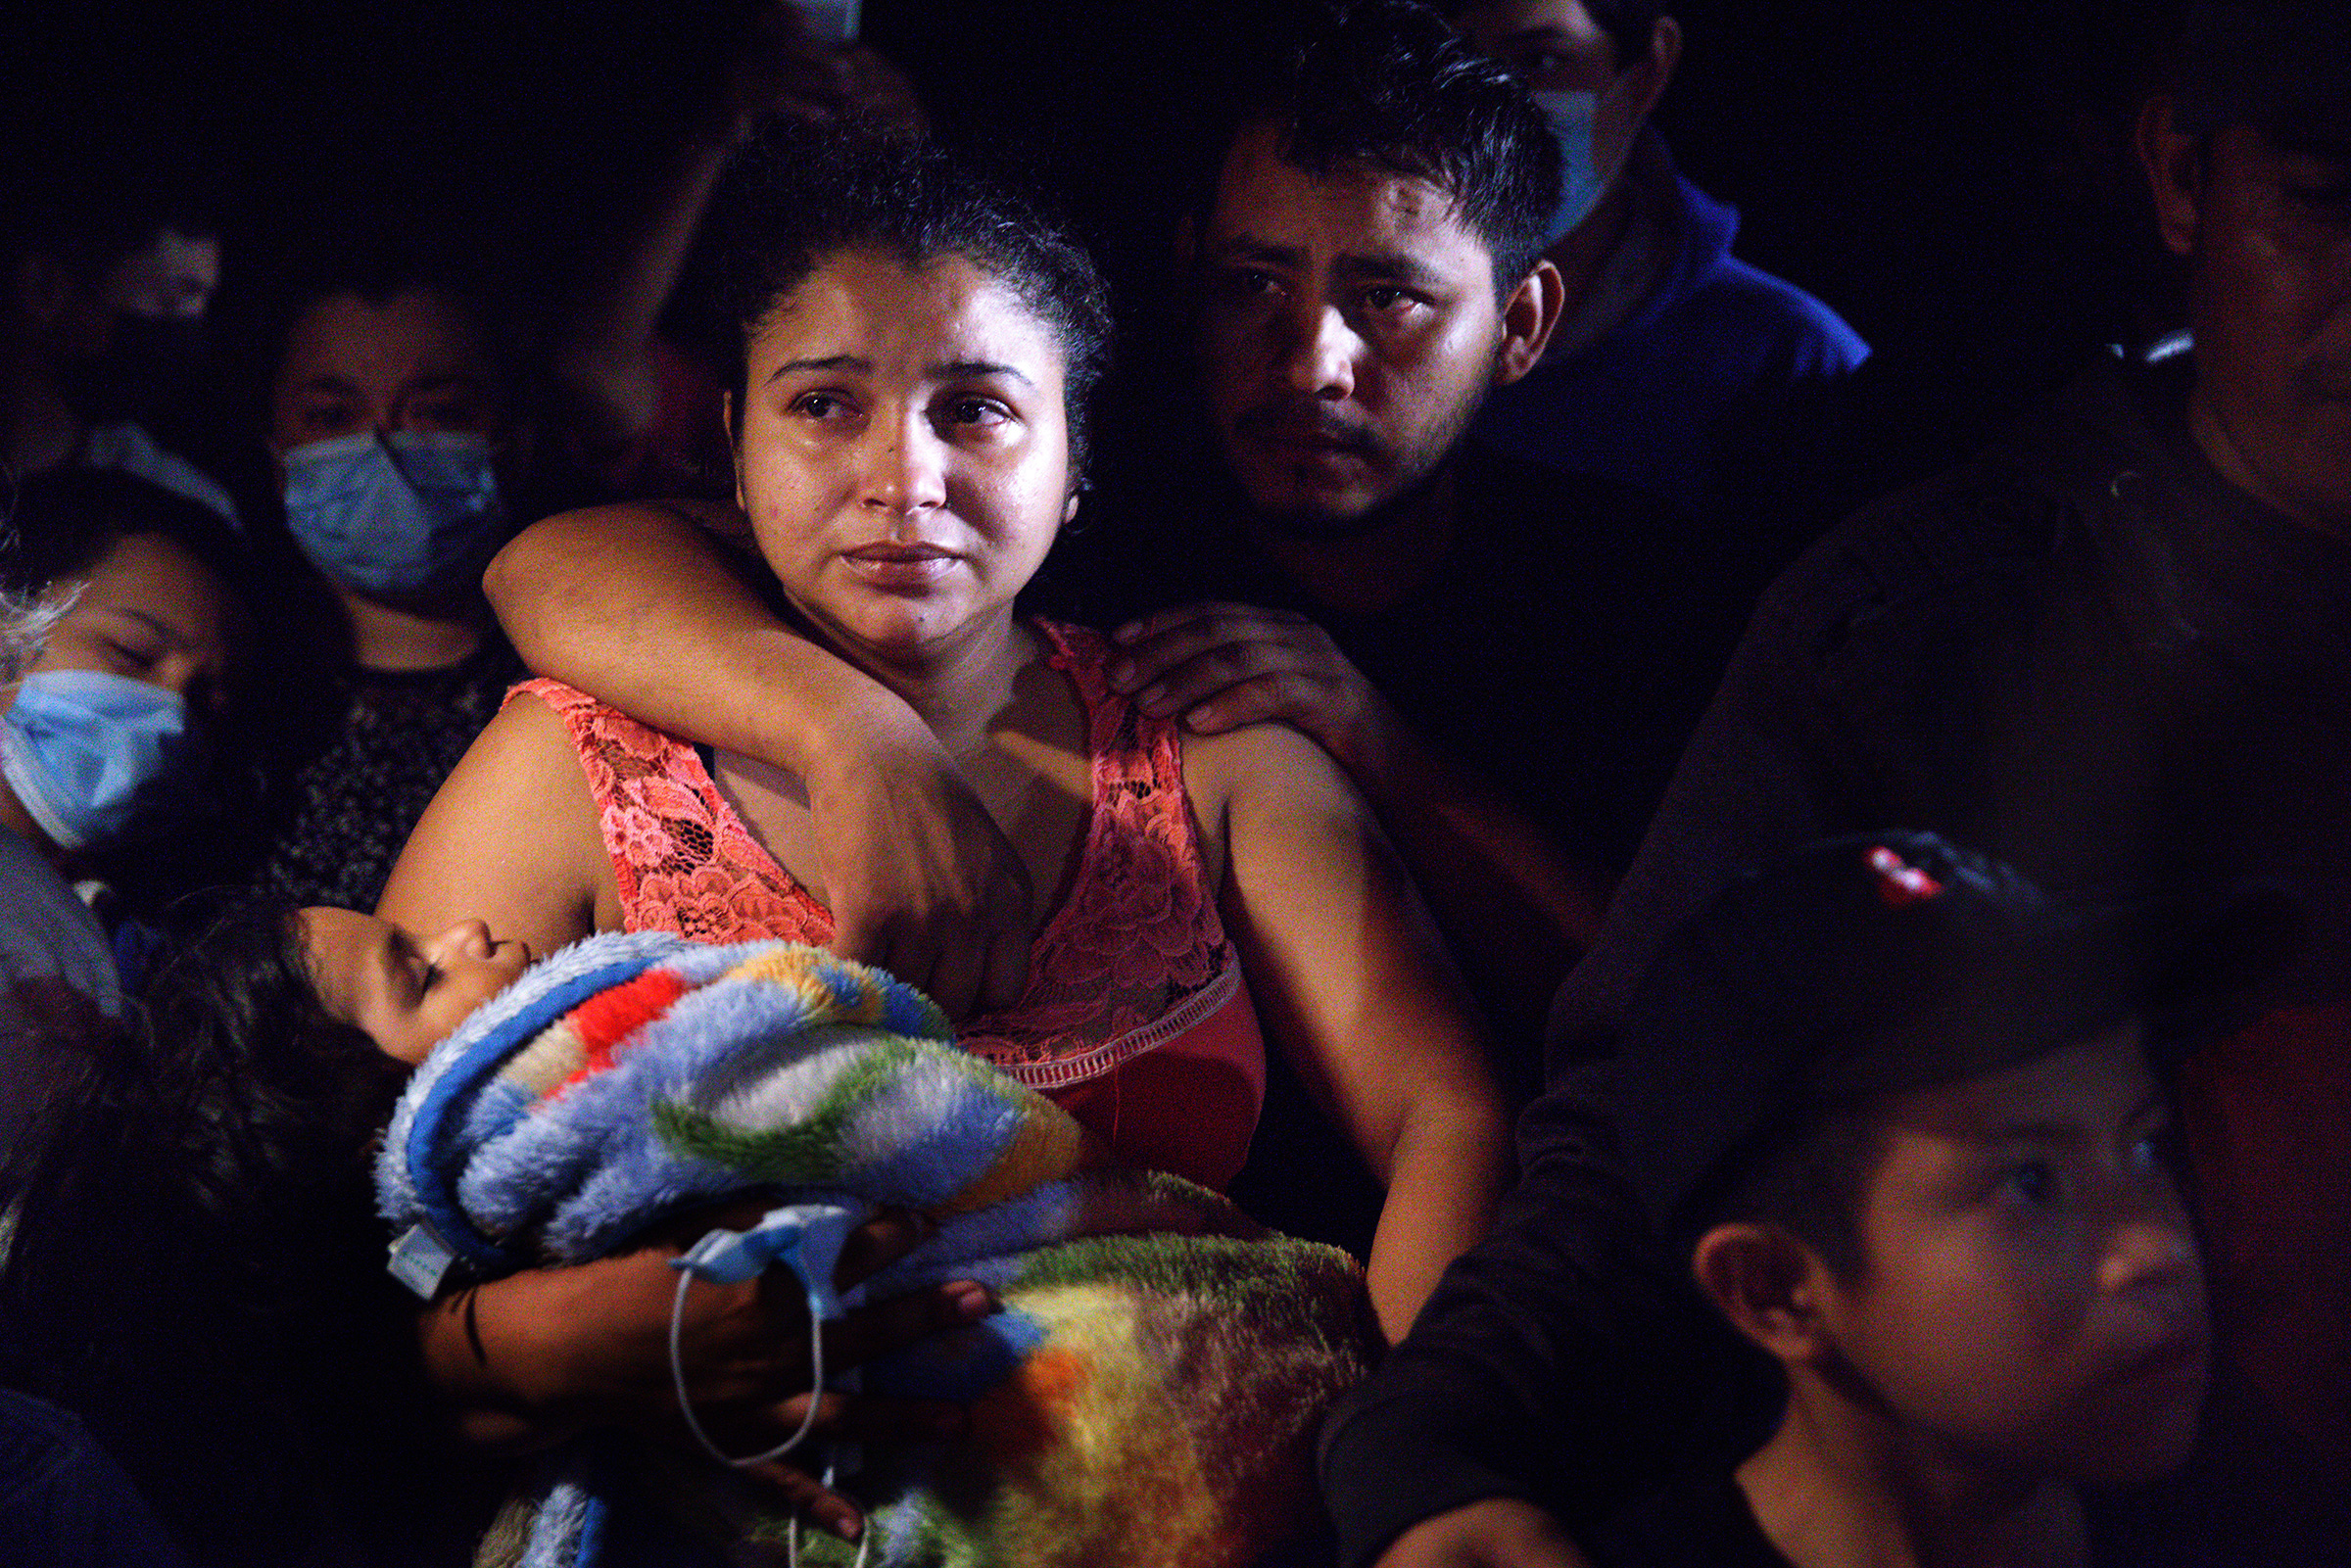 Honduran parents hold their sleeping boy after crossing the Rio Grande from Mexico in Roma, Texas, on April 15, 2021. (John Moore—Getty Images)